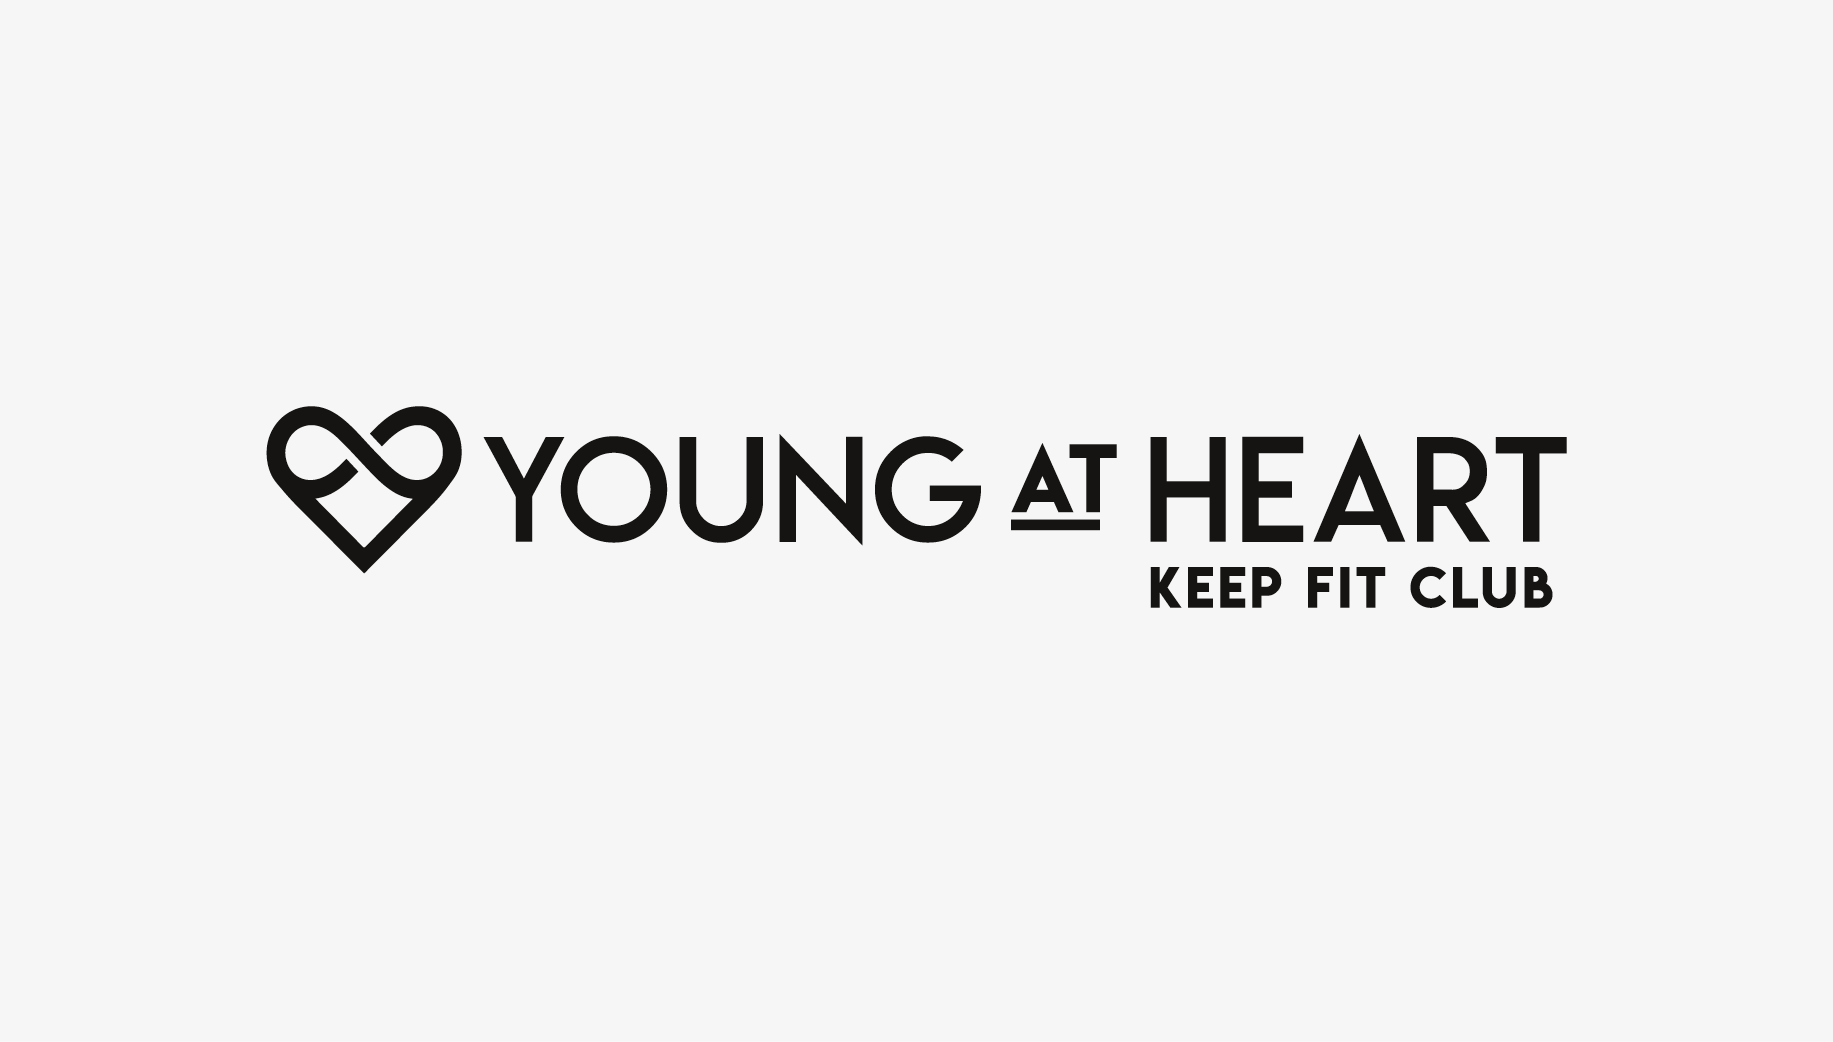 Young At Heart Keep Fit Club logo